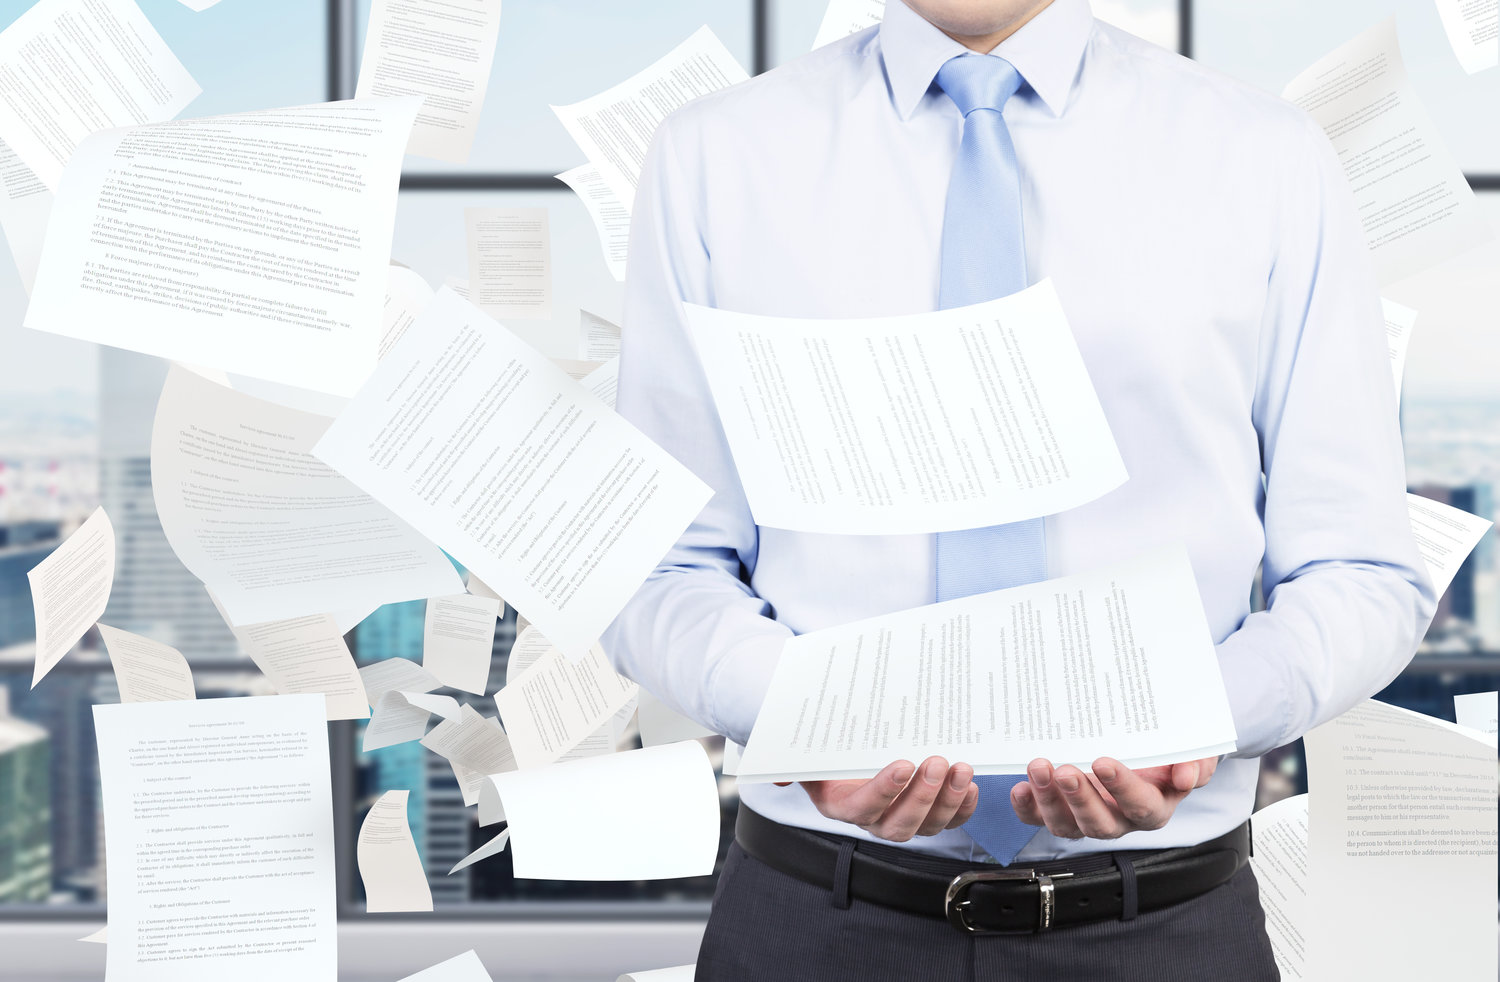 Go Paperless – Save Money Through Document Scanning Services